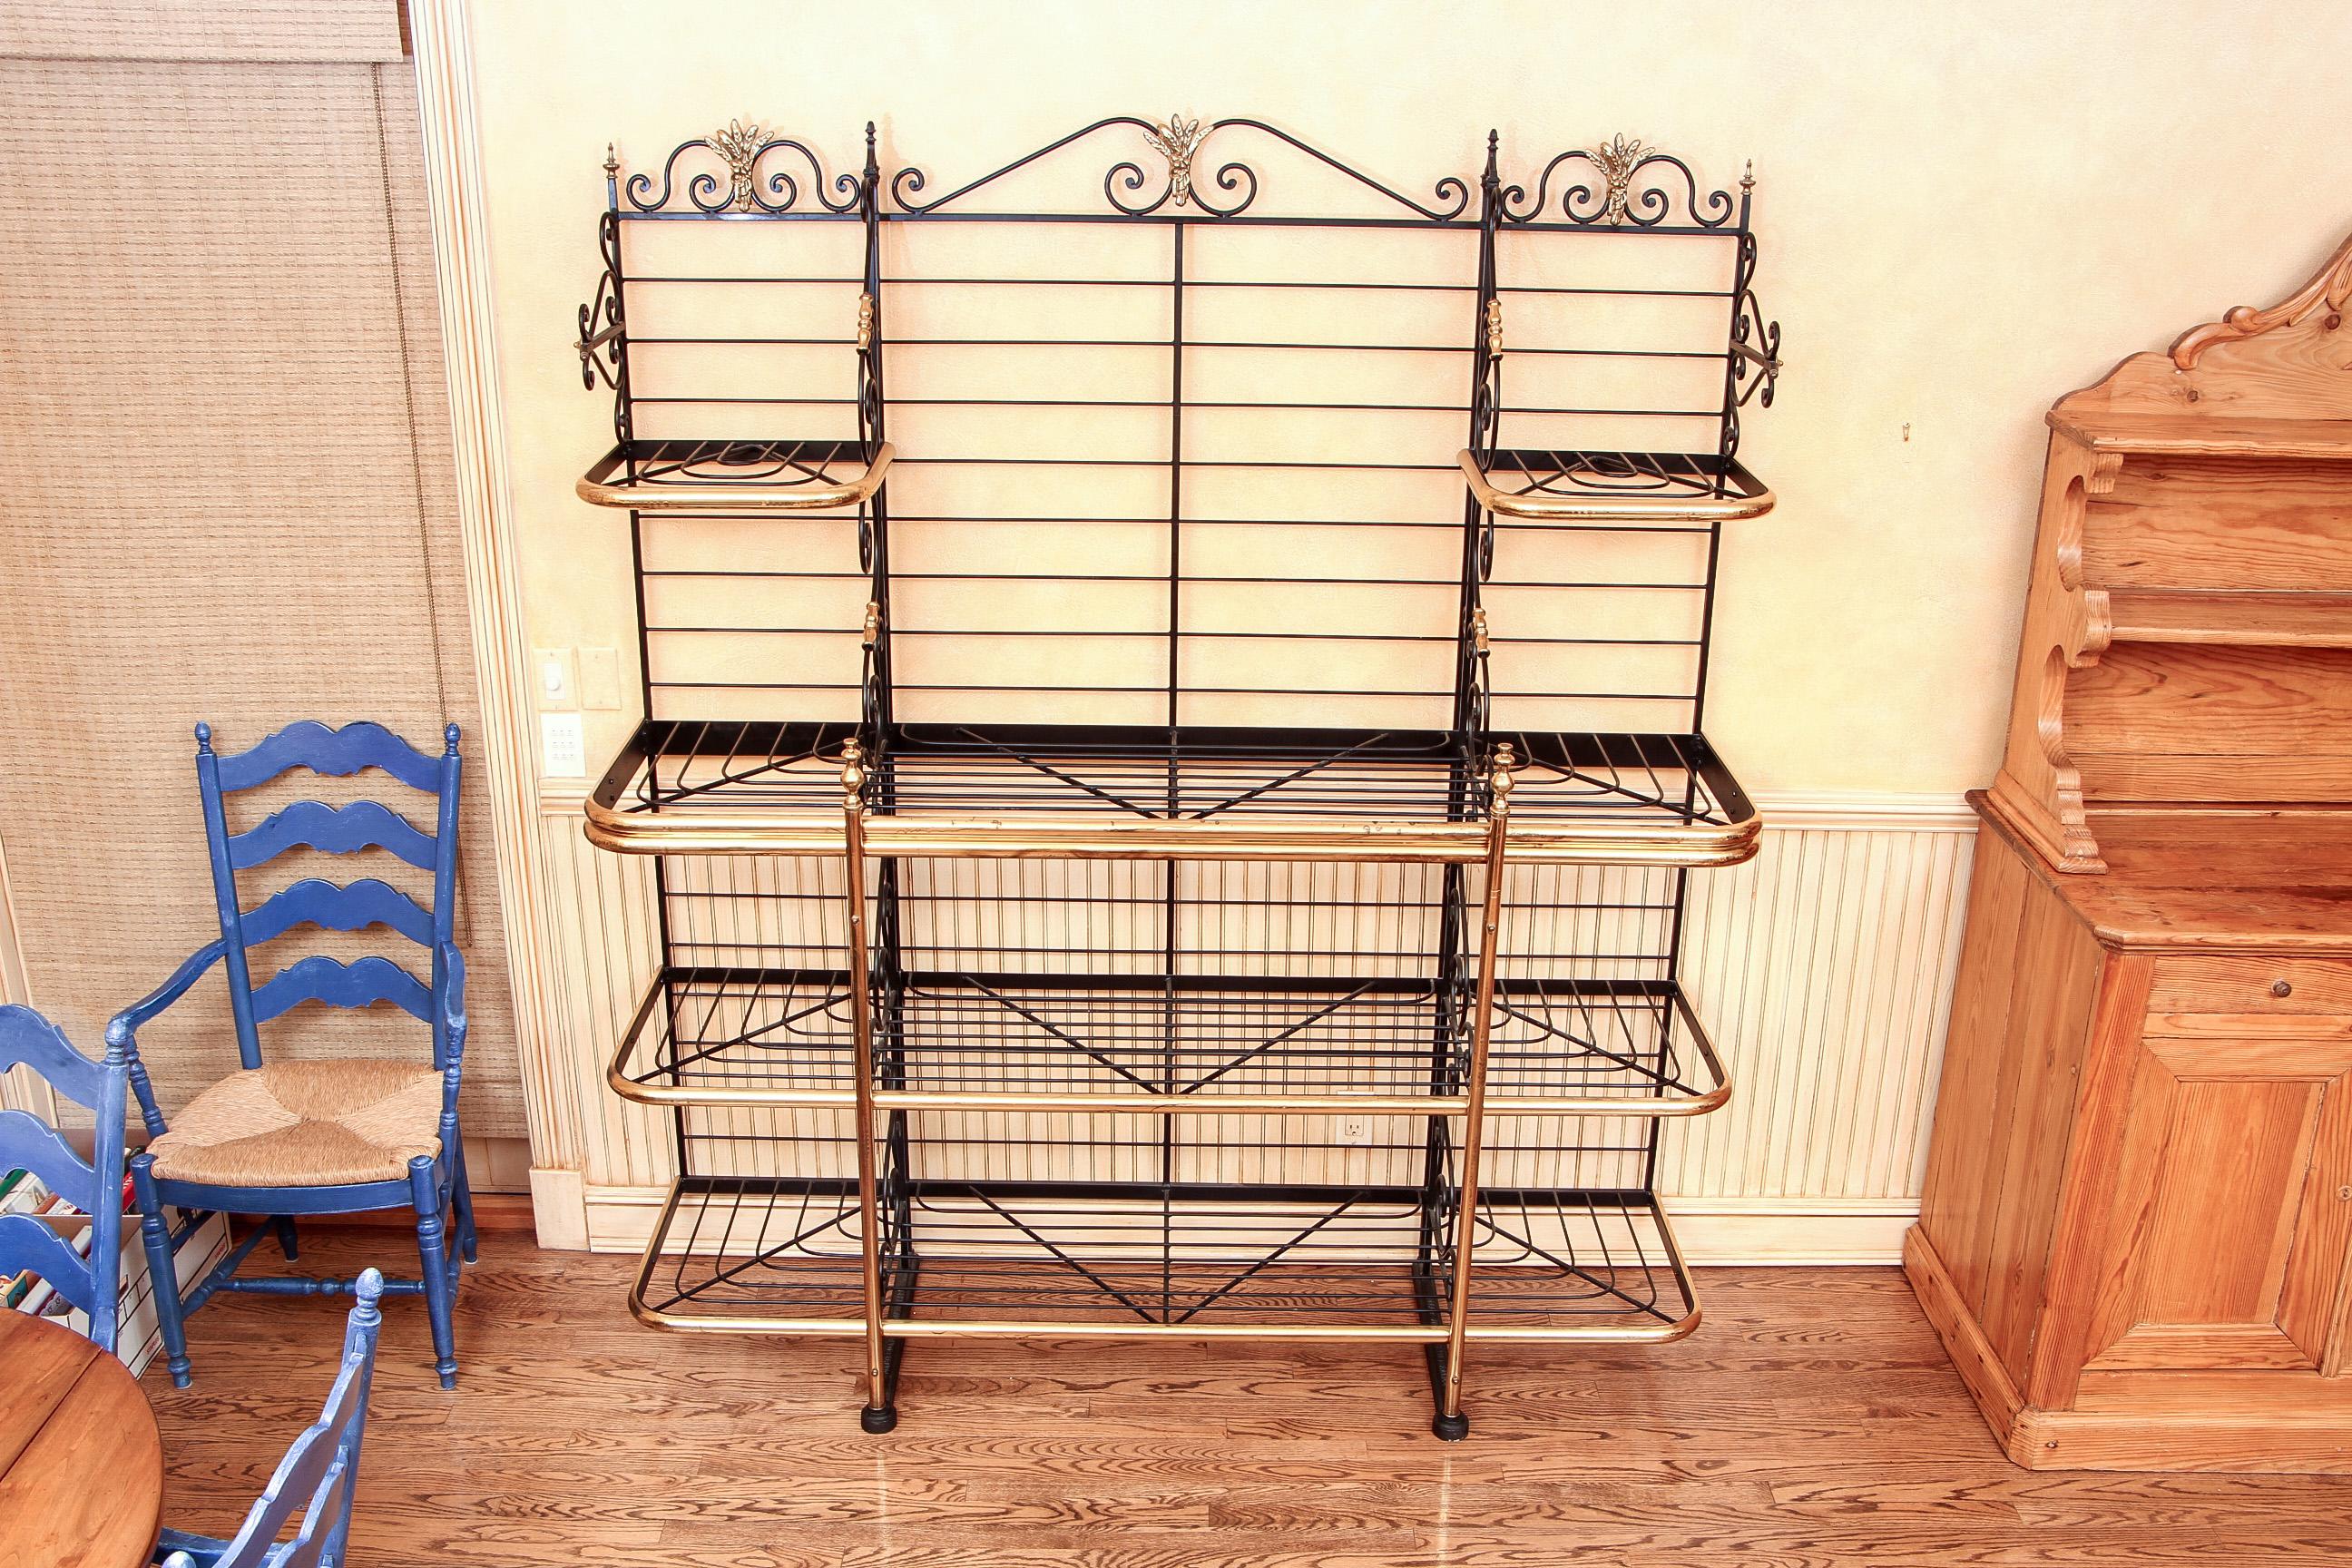 Massive French iron and brass baker's rack, three part iron rack with brass details including a centre motif of sheaves of wheat, scrolled top and sides, and brass banded shelves. By Perfit Fils Ltd., Paris, stamped on the base.

Condition: